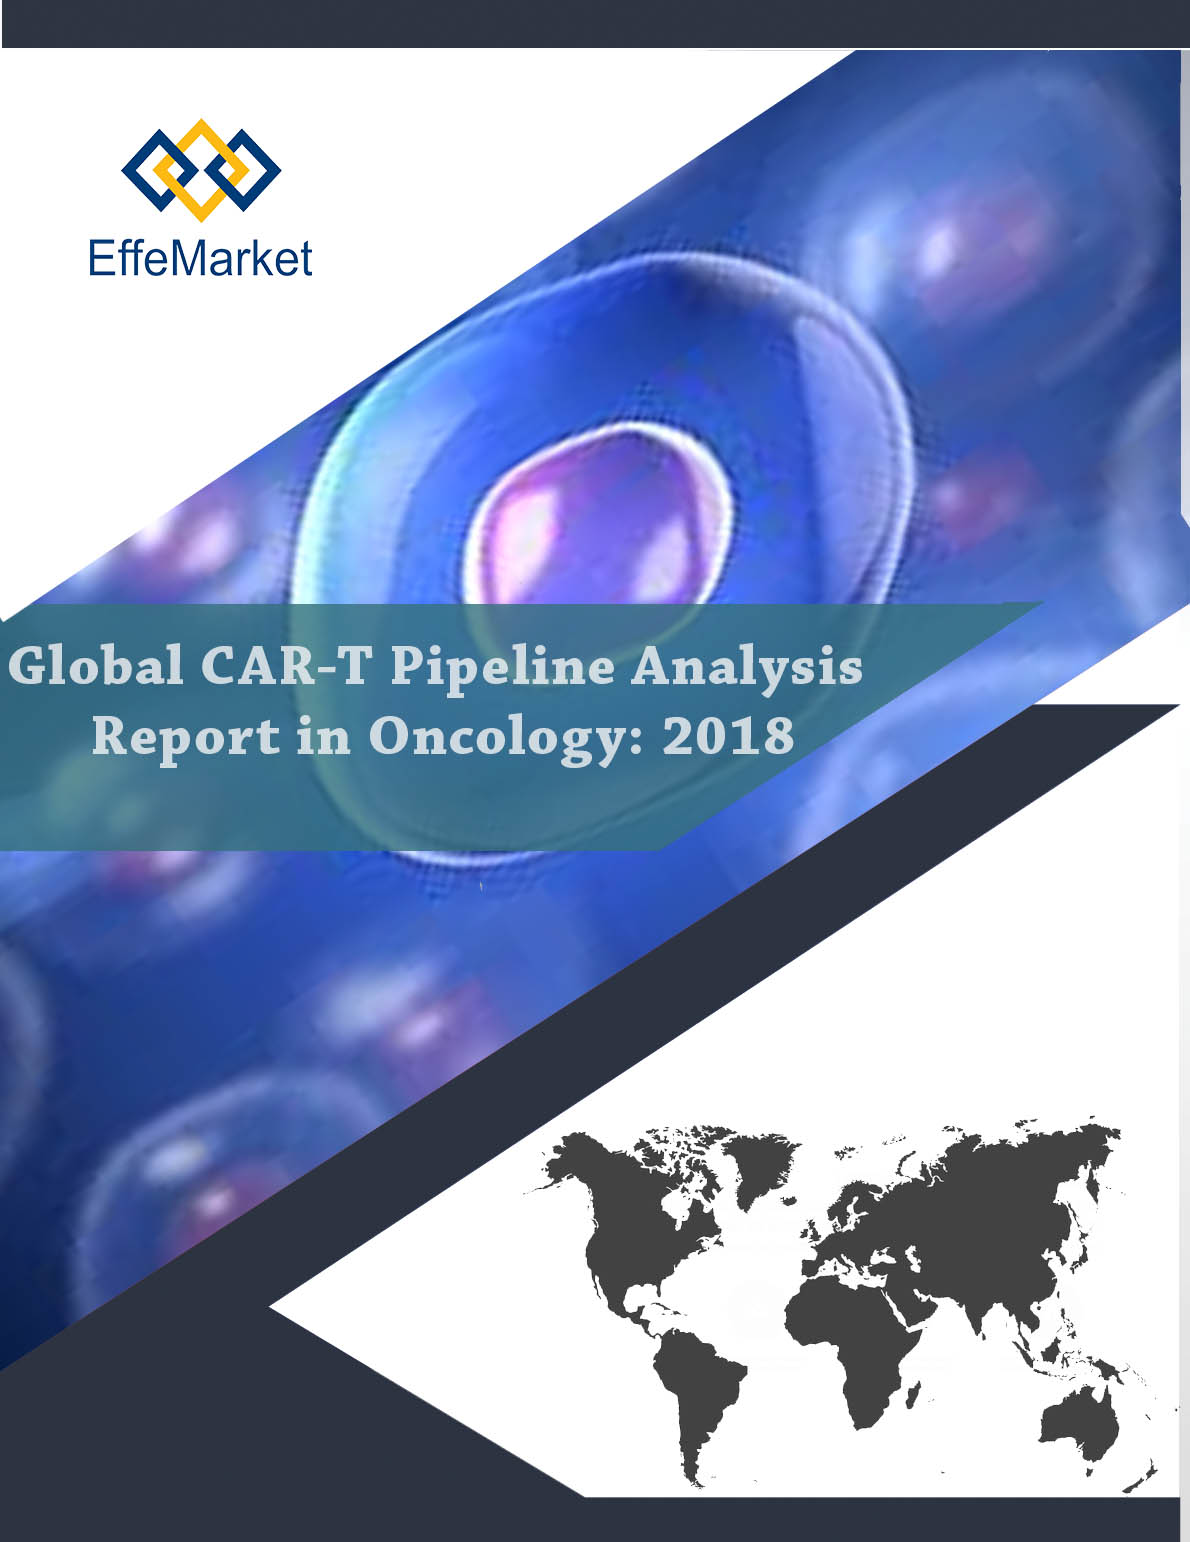 Global CAR-T Pipeline Analysis Report in Oncology: 2018